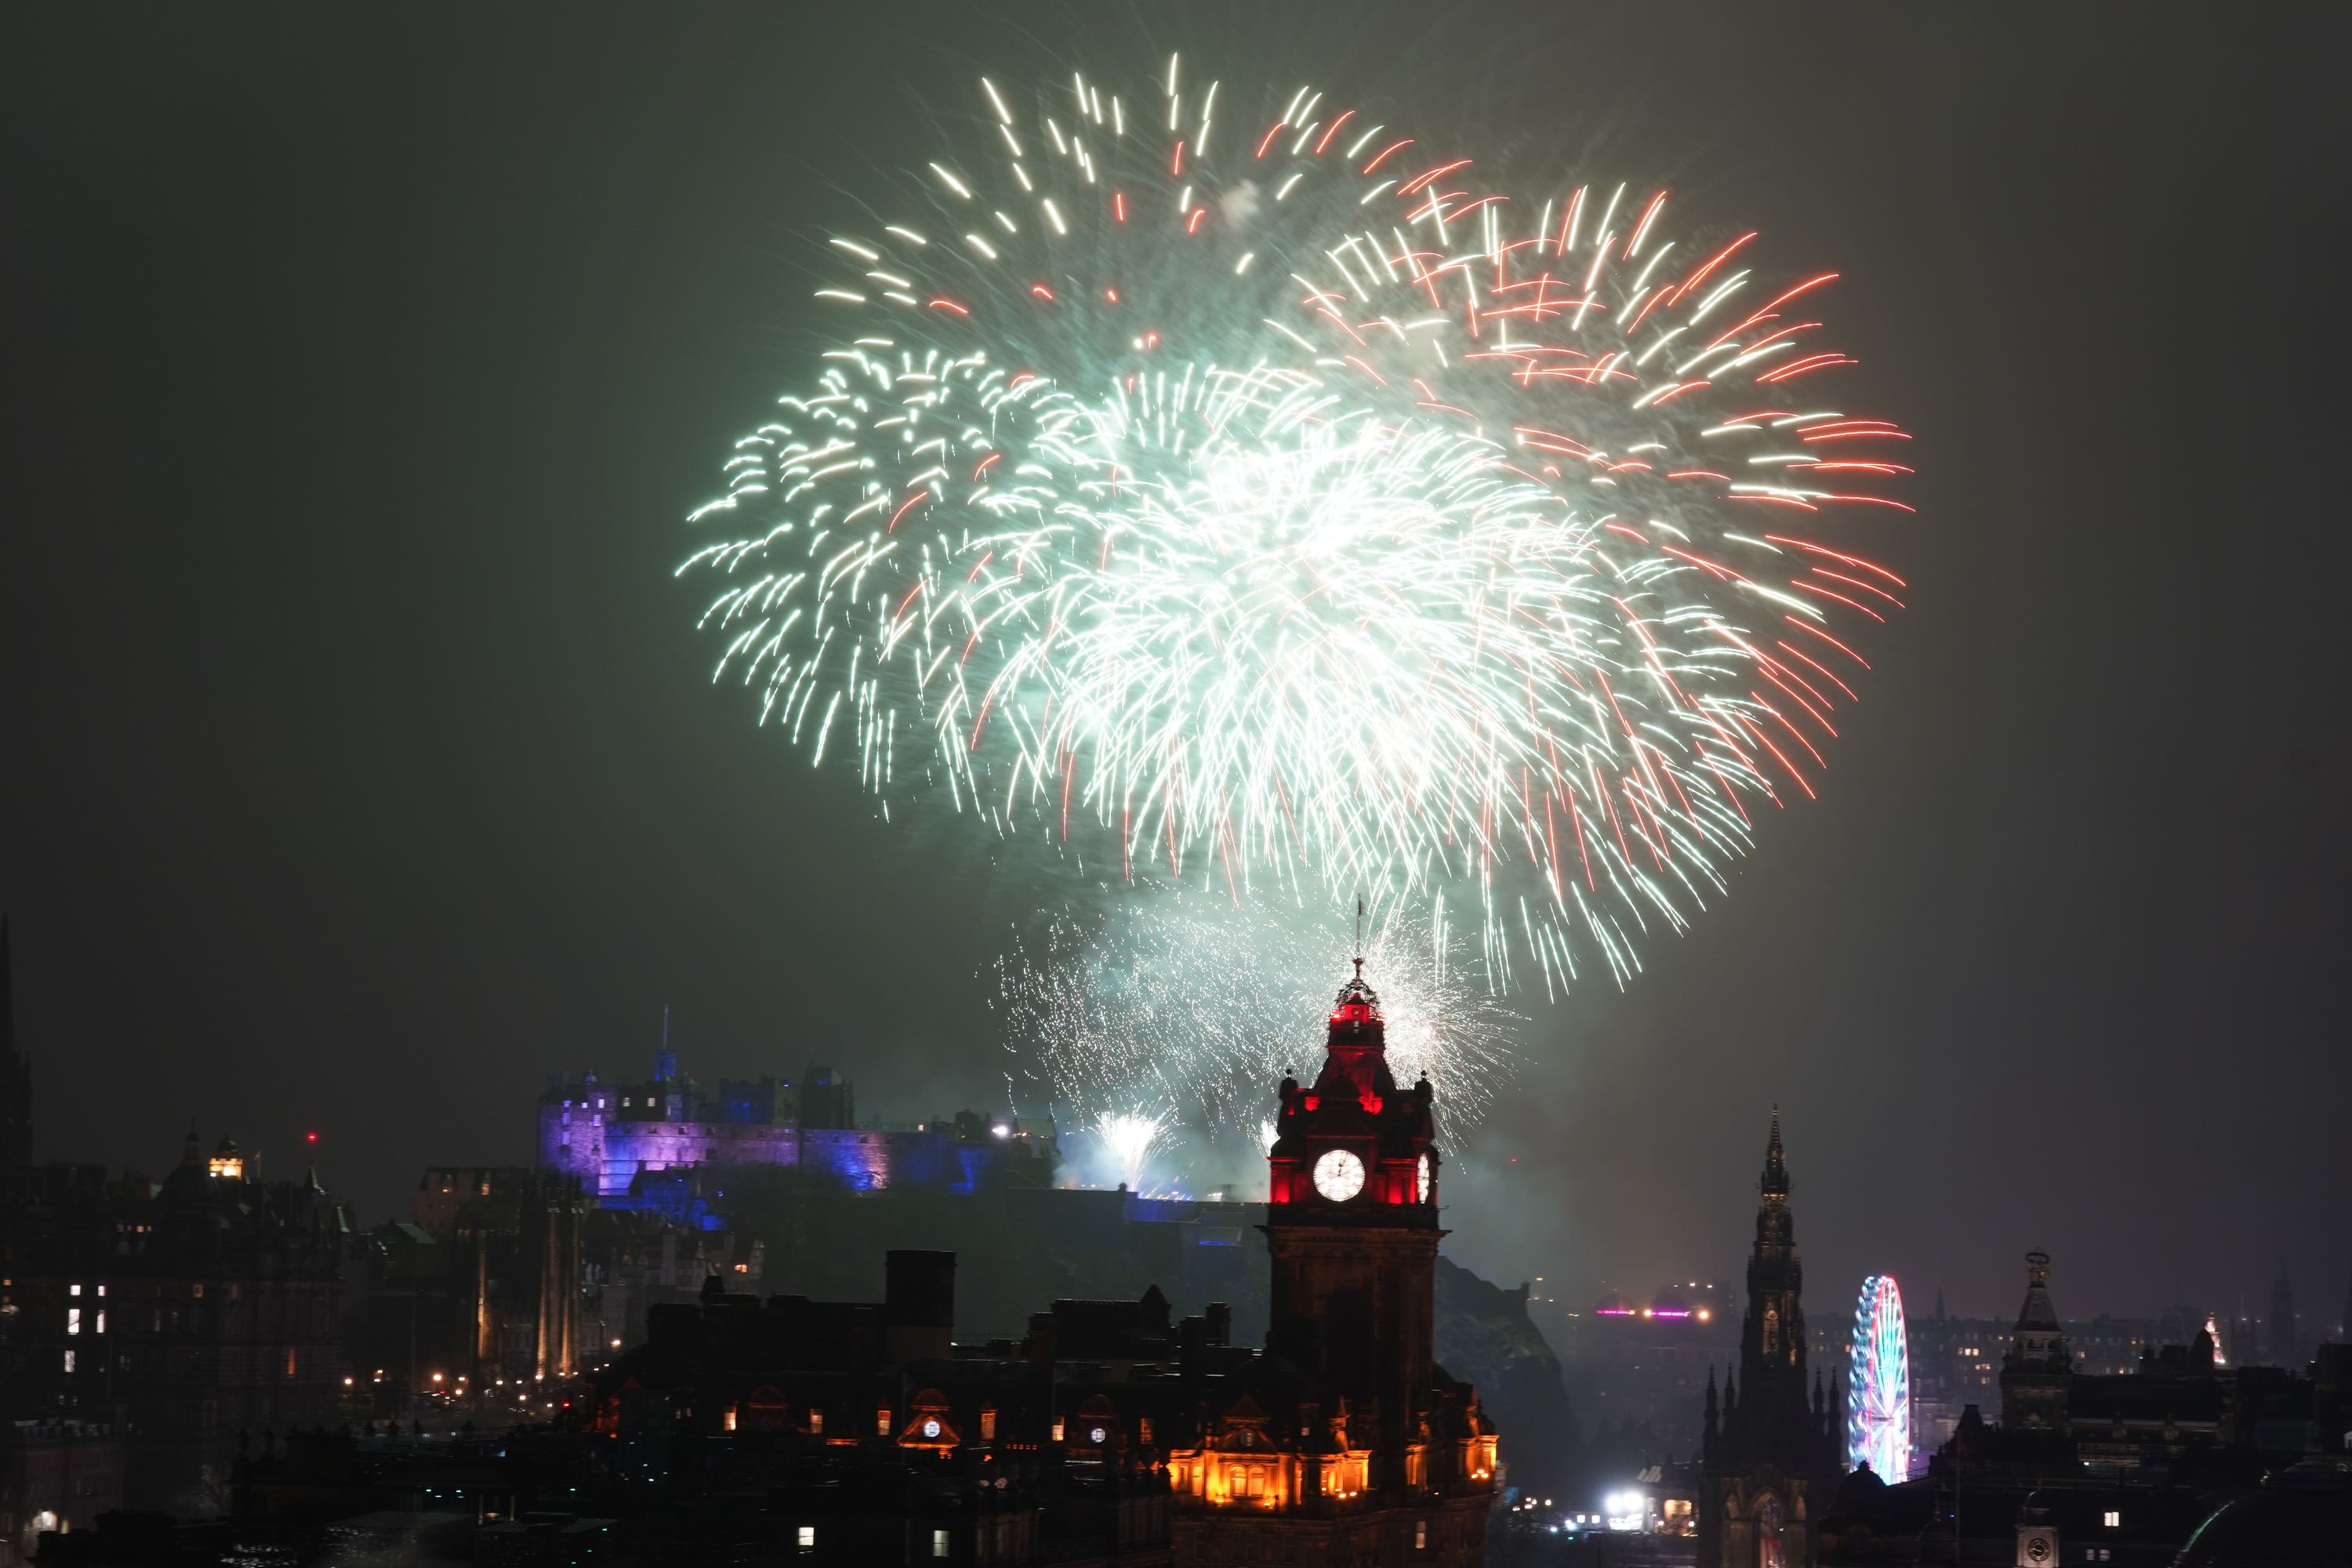 Some 50,000 revellers are expected to celebrate Hogmanay in Scotland’s capital (Andrew Milligan/PA)